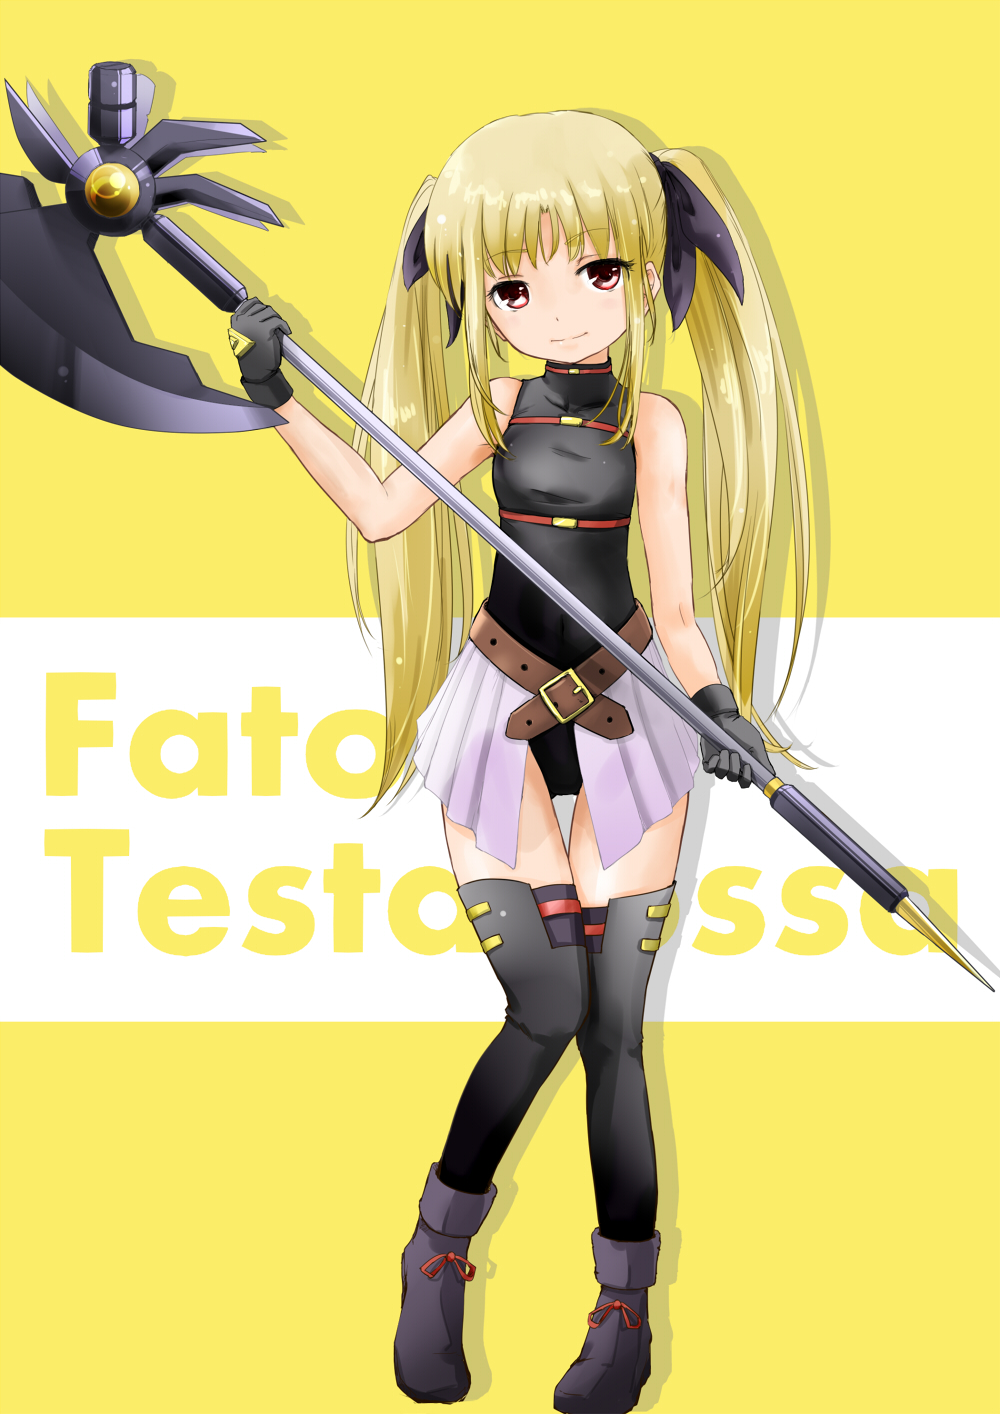 1girl background_text ban_(777purin) bangs bardiche belt black_footwear black_gloves black_legwear black_leotard black_ribbon blonde_hair brown_belt character_name closed_mouth commentary english_text engrish_text eyebrows_visible_through_hair fate_testarossa full_body gloves hair_ribbon highres holding holding_weapon leotard long_hair looking_at_viewer lyrical_nanoha magical_girl mahou_shoujo_lyrical_nanoha mahou_shoujo_lyrical_nanoha_the_movie_1st miniskirt pink_skirt pleated_skirt poleaxe ranguage red_eyes ribbon shadow shoes sidelocks skirt sleeveless smile solo standing thigh-highs thigh_gap twintails weapon yellow_background